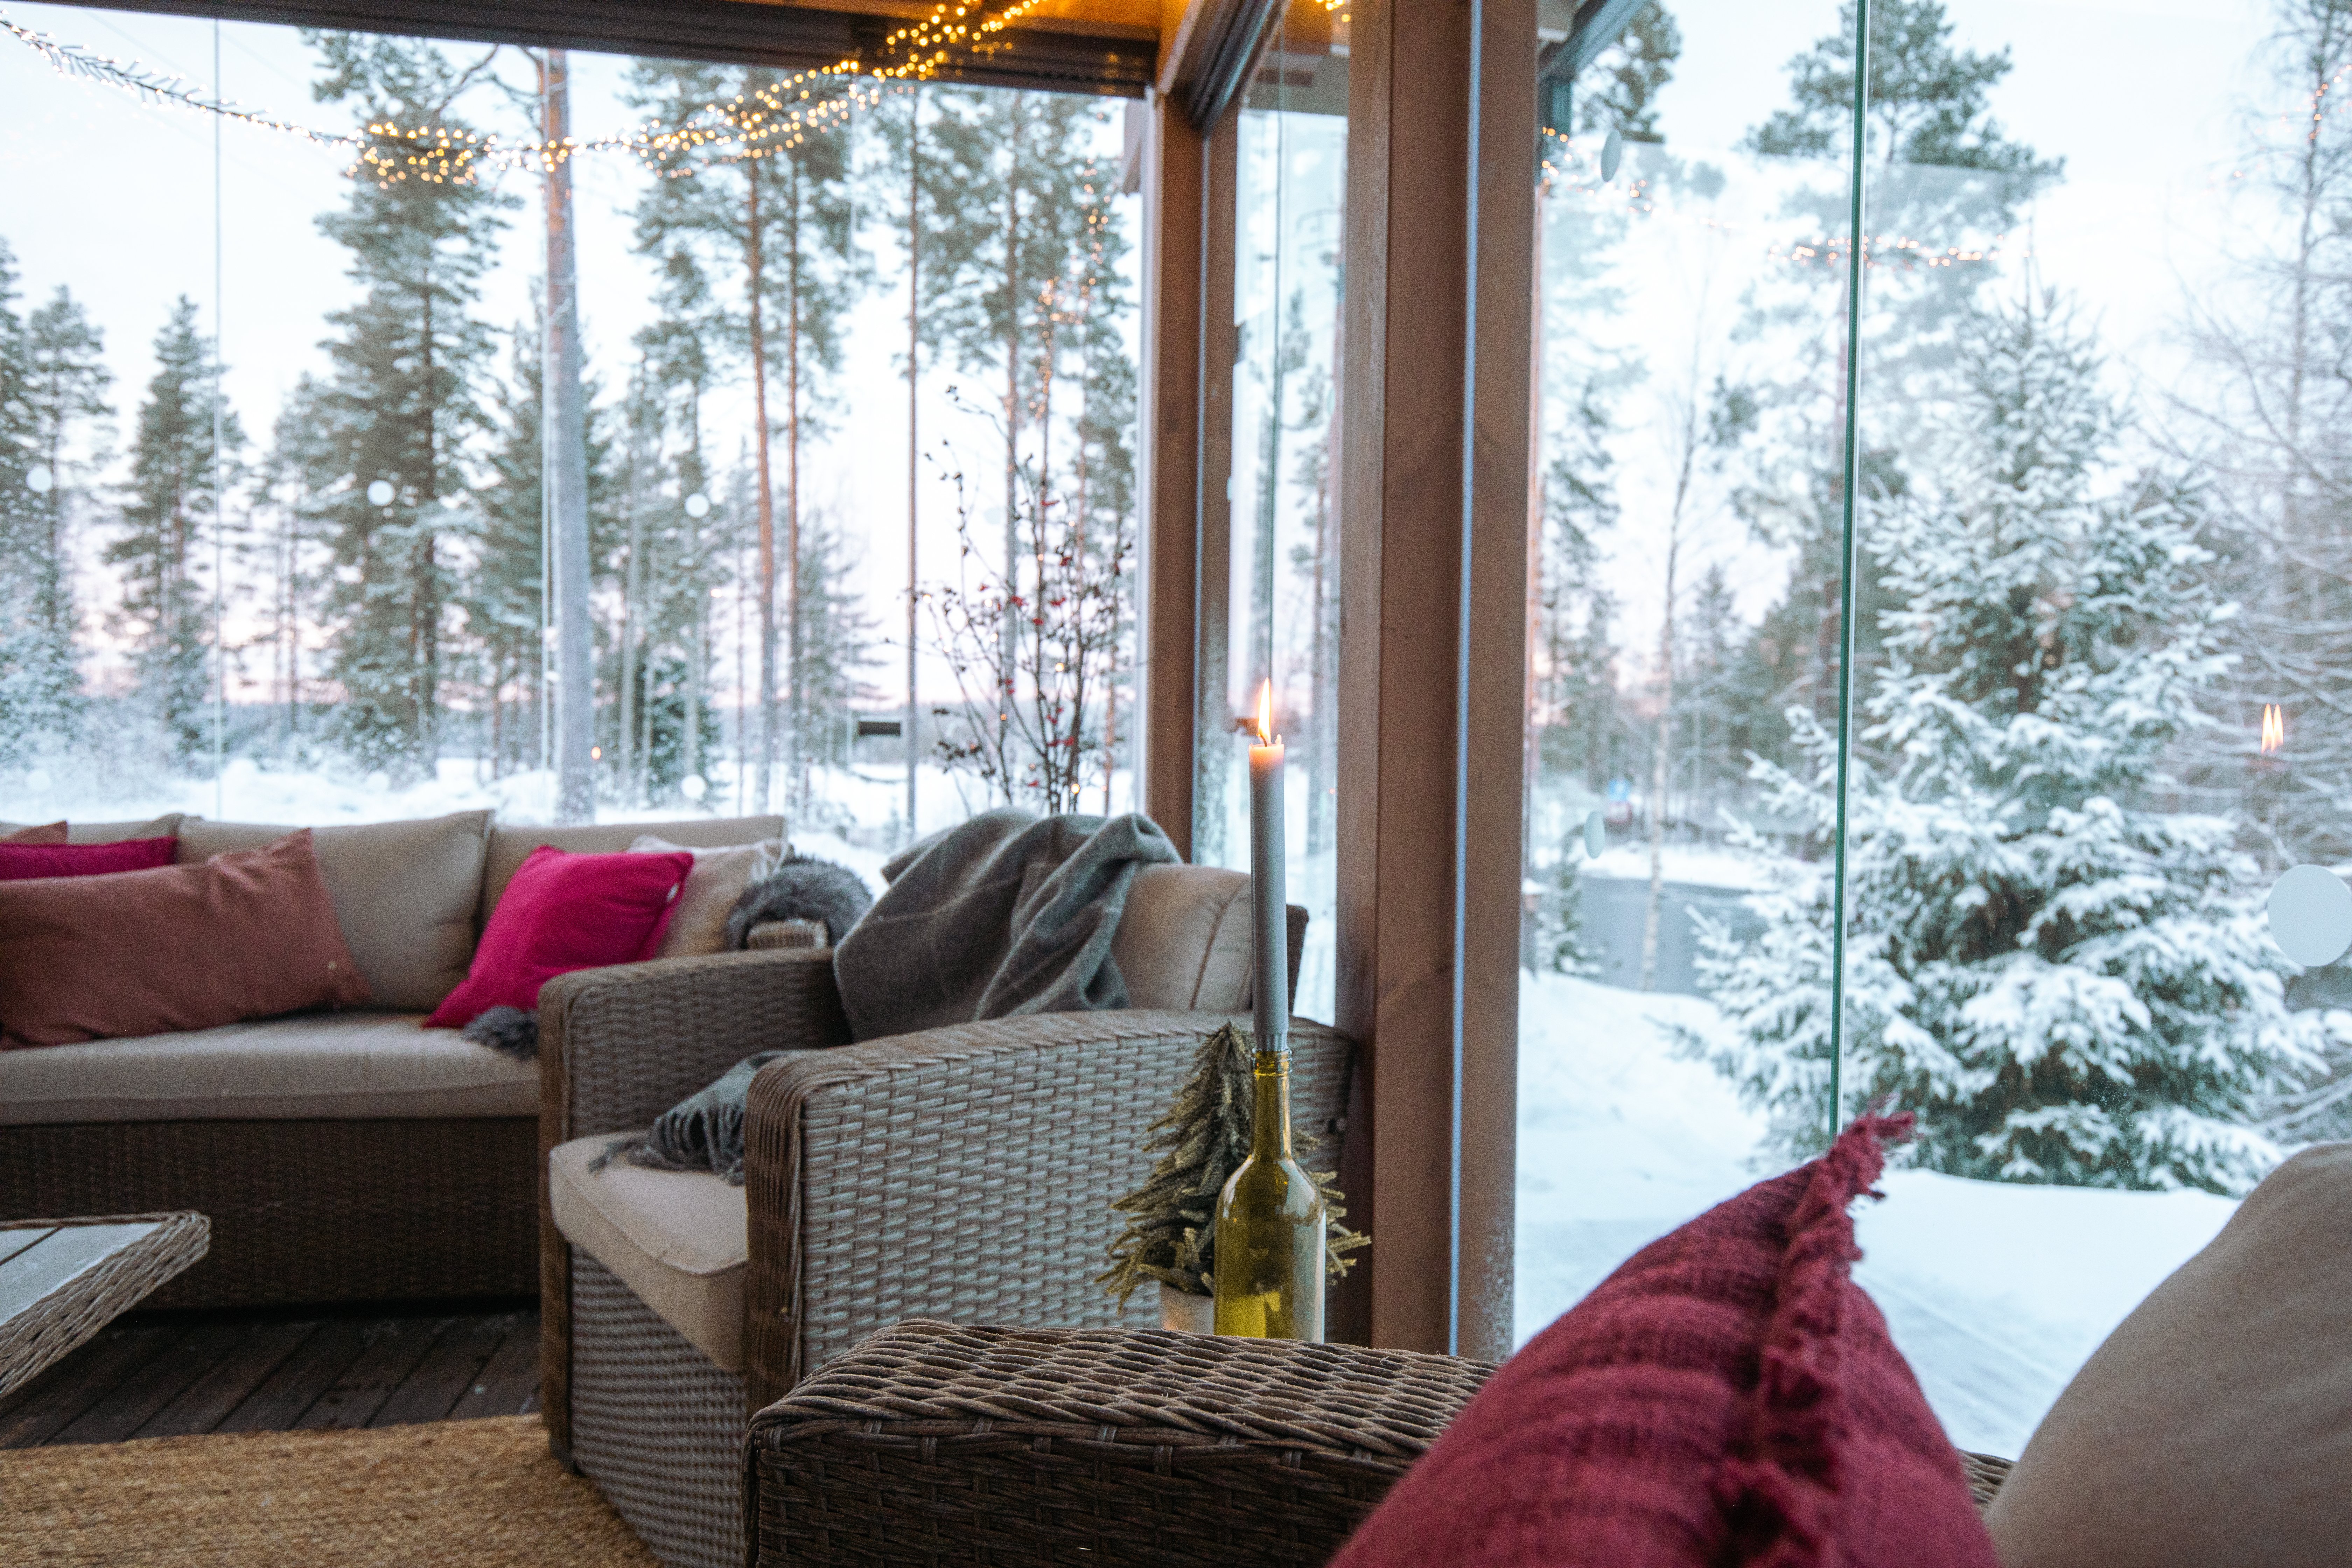 Cozy winter sunroom with snowy scenery in the back